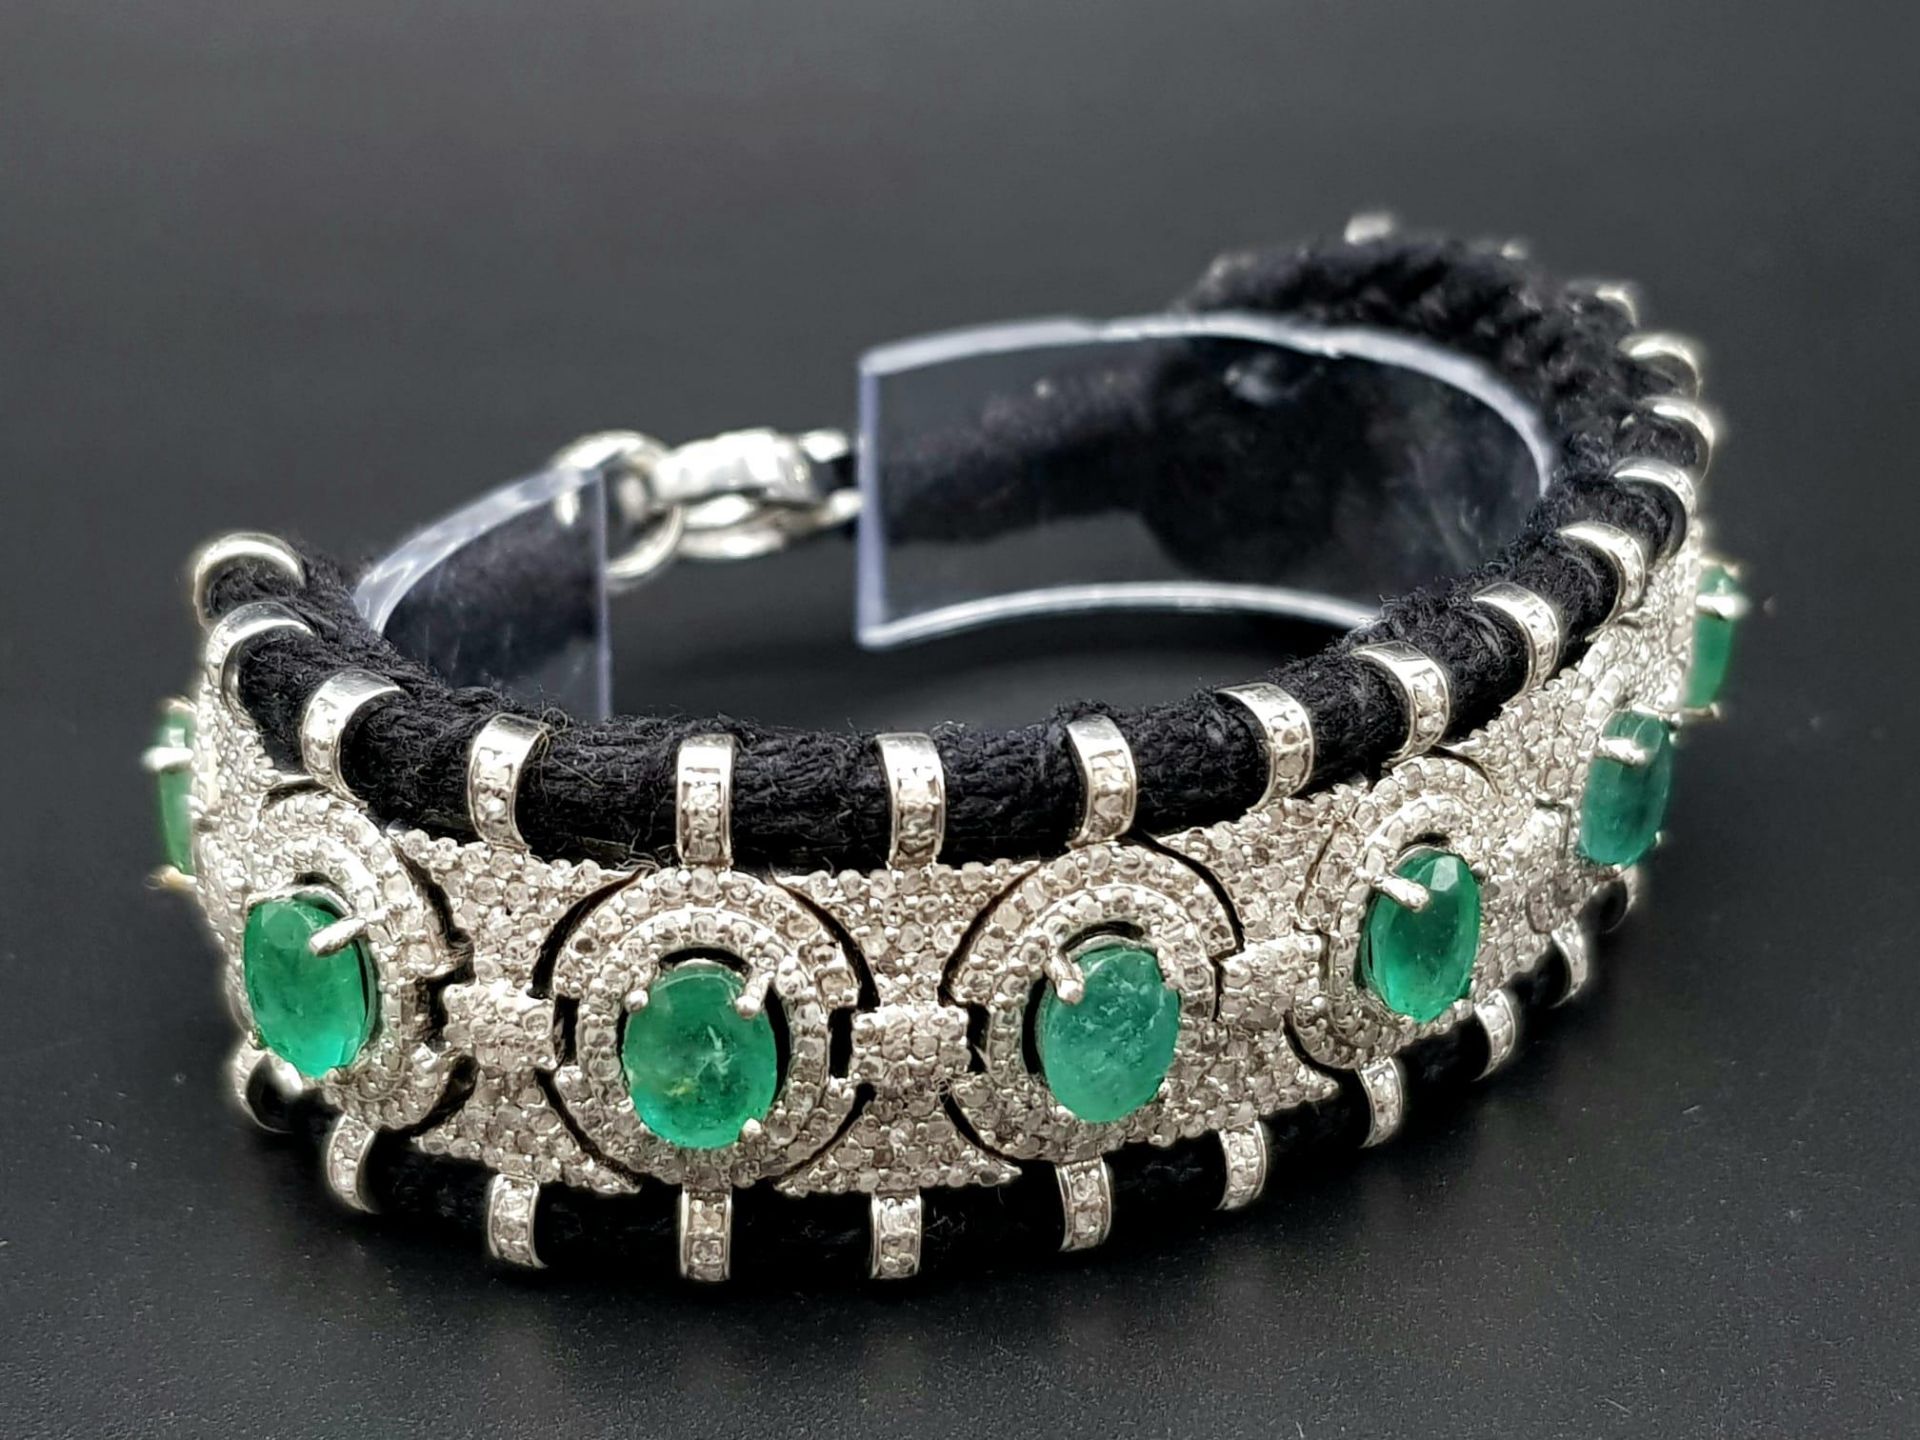 An Asian Inspired Emerald and Diamond Bracelet set in a Woven Black Textile. 10ctw of oval cut - Image 3 of 7